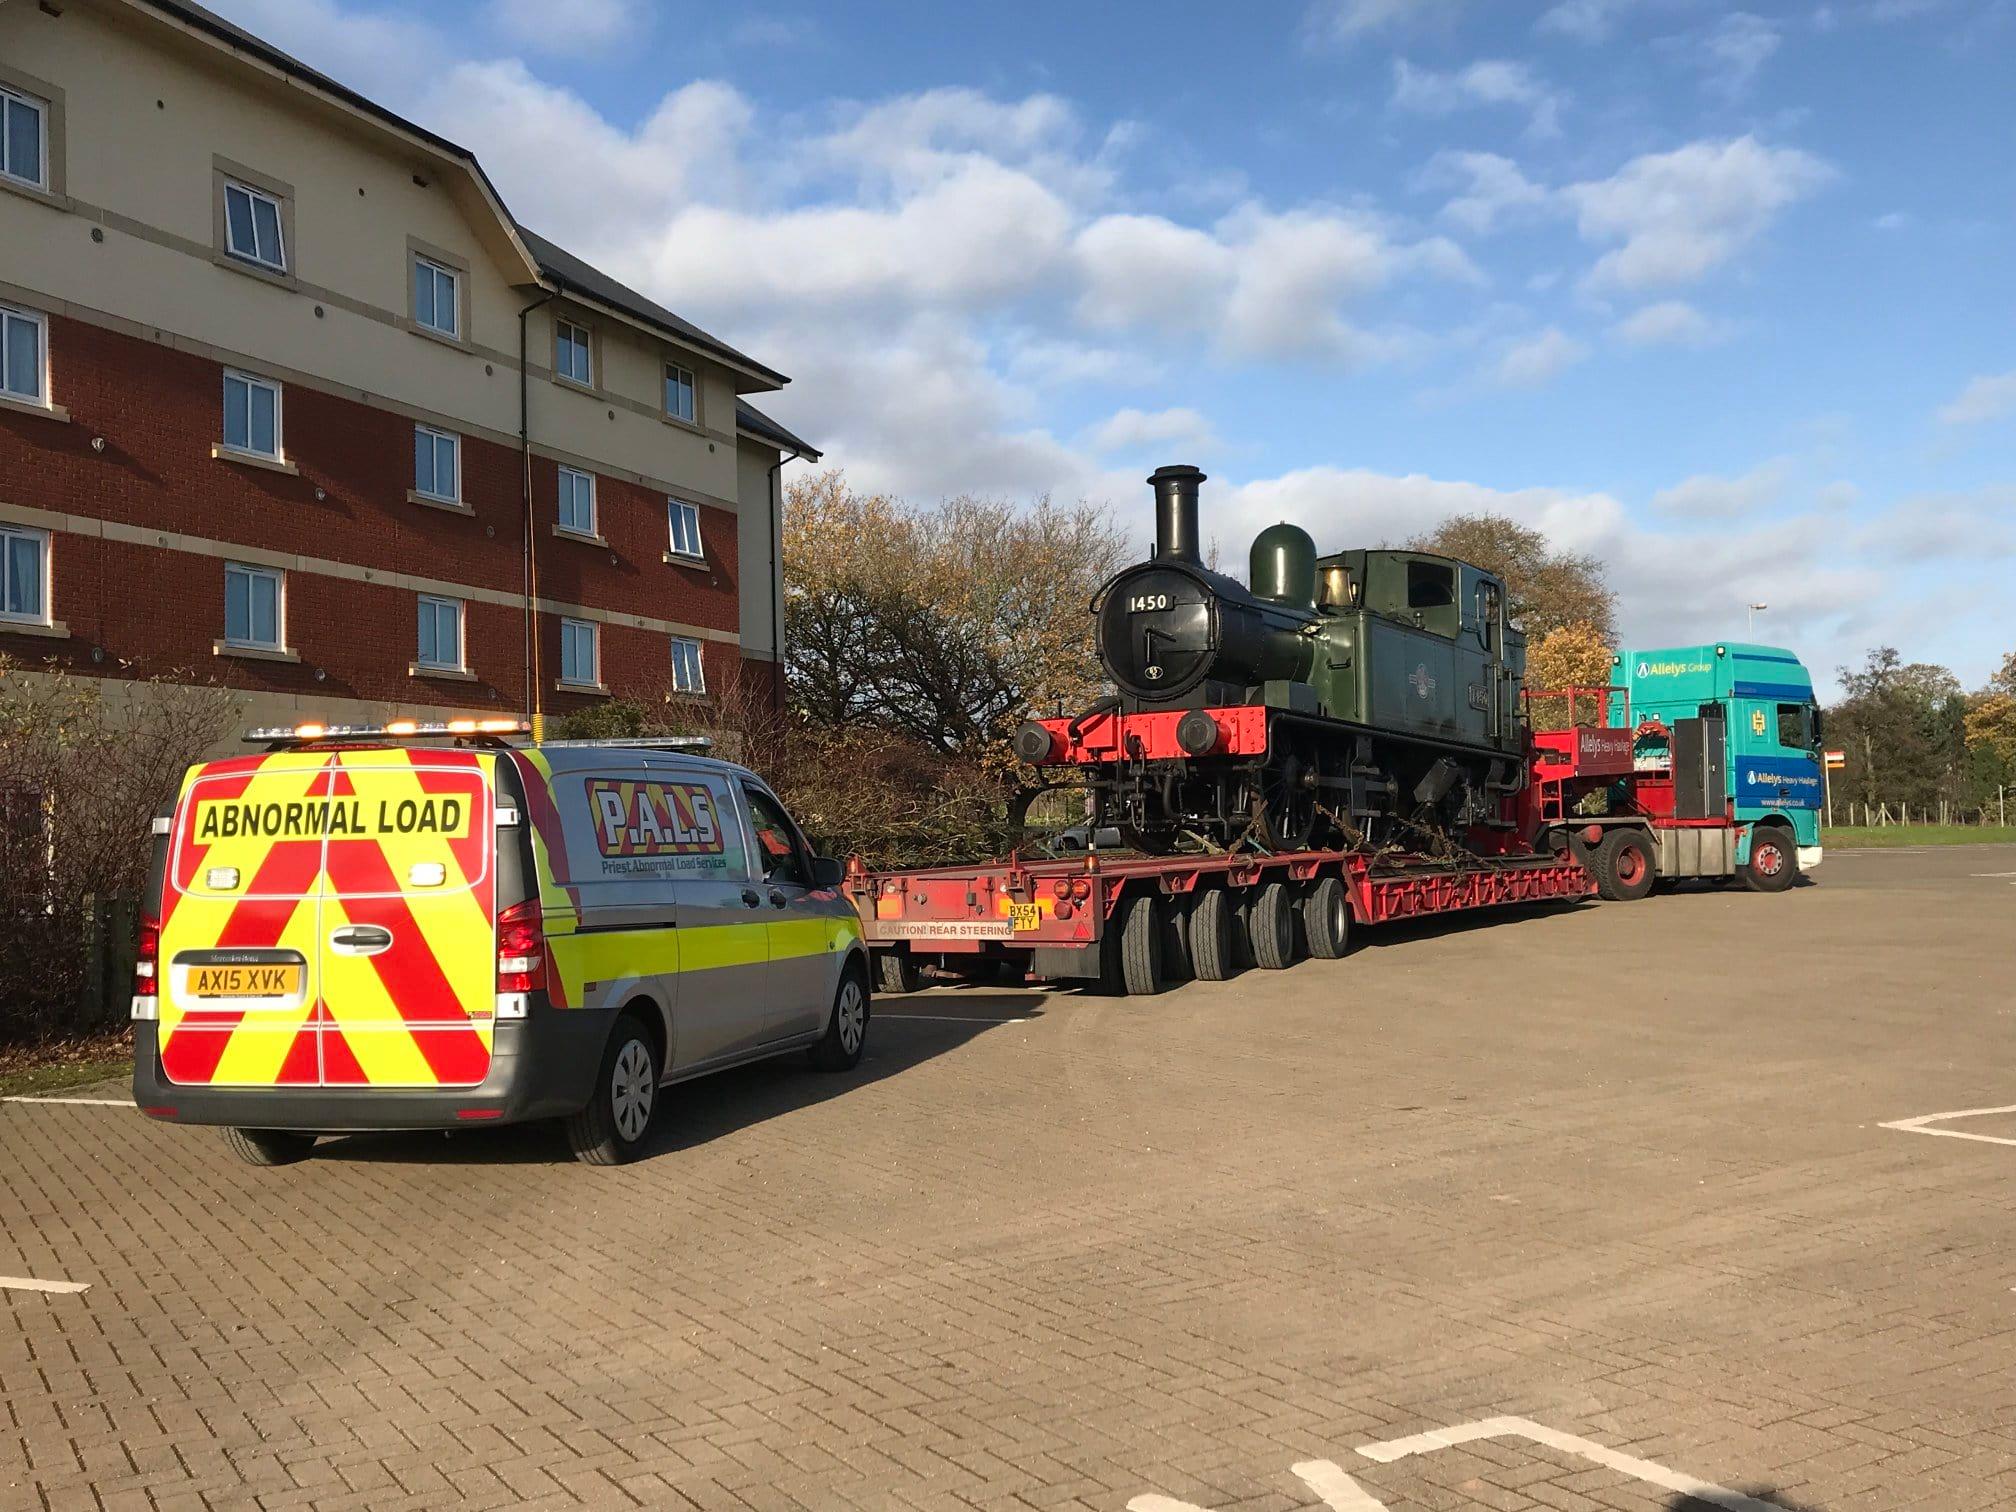 Images Priest Abnormal Load Services